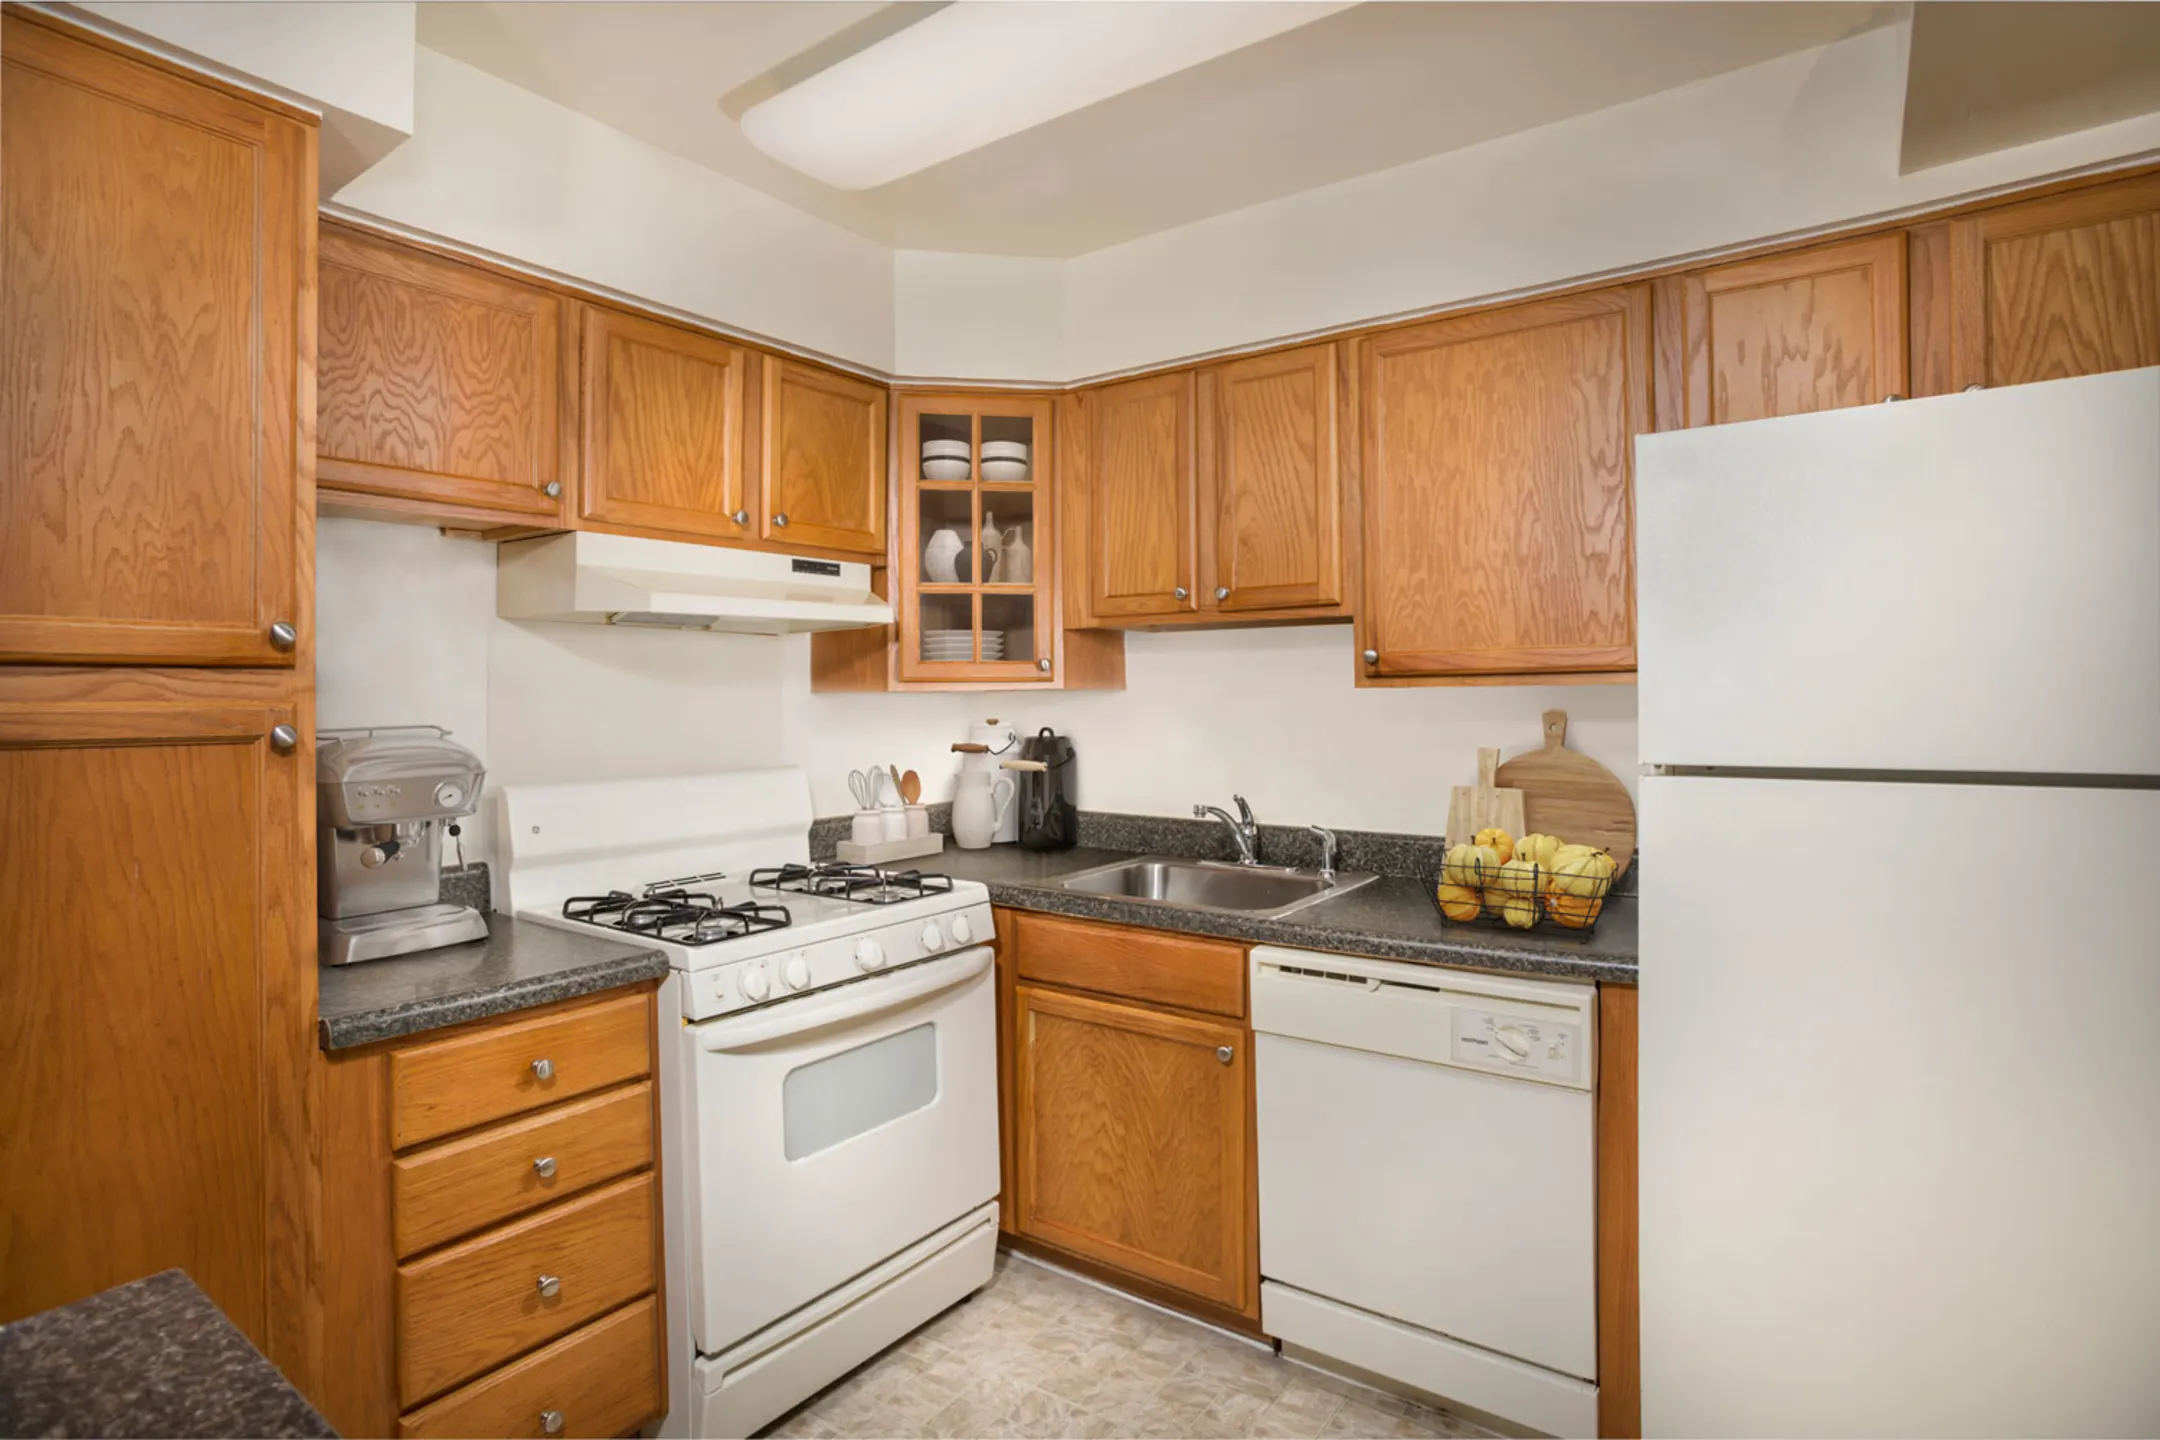 Kitchen - Whitehall Square - Suitland, MD